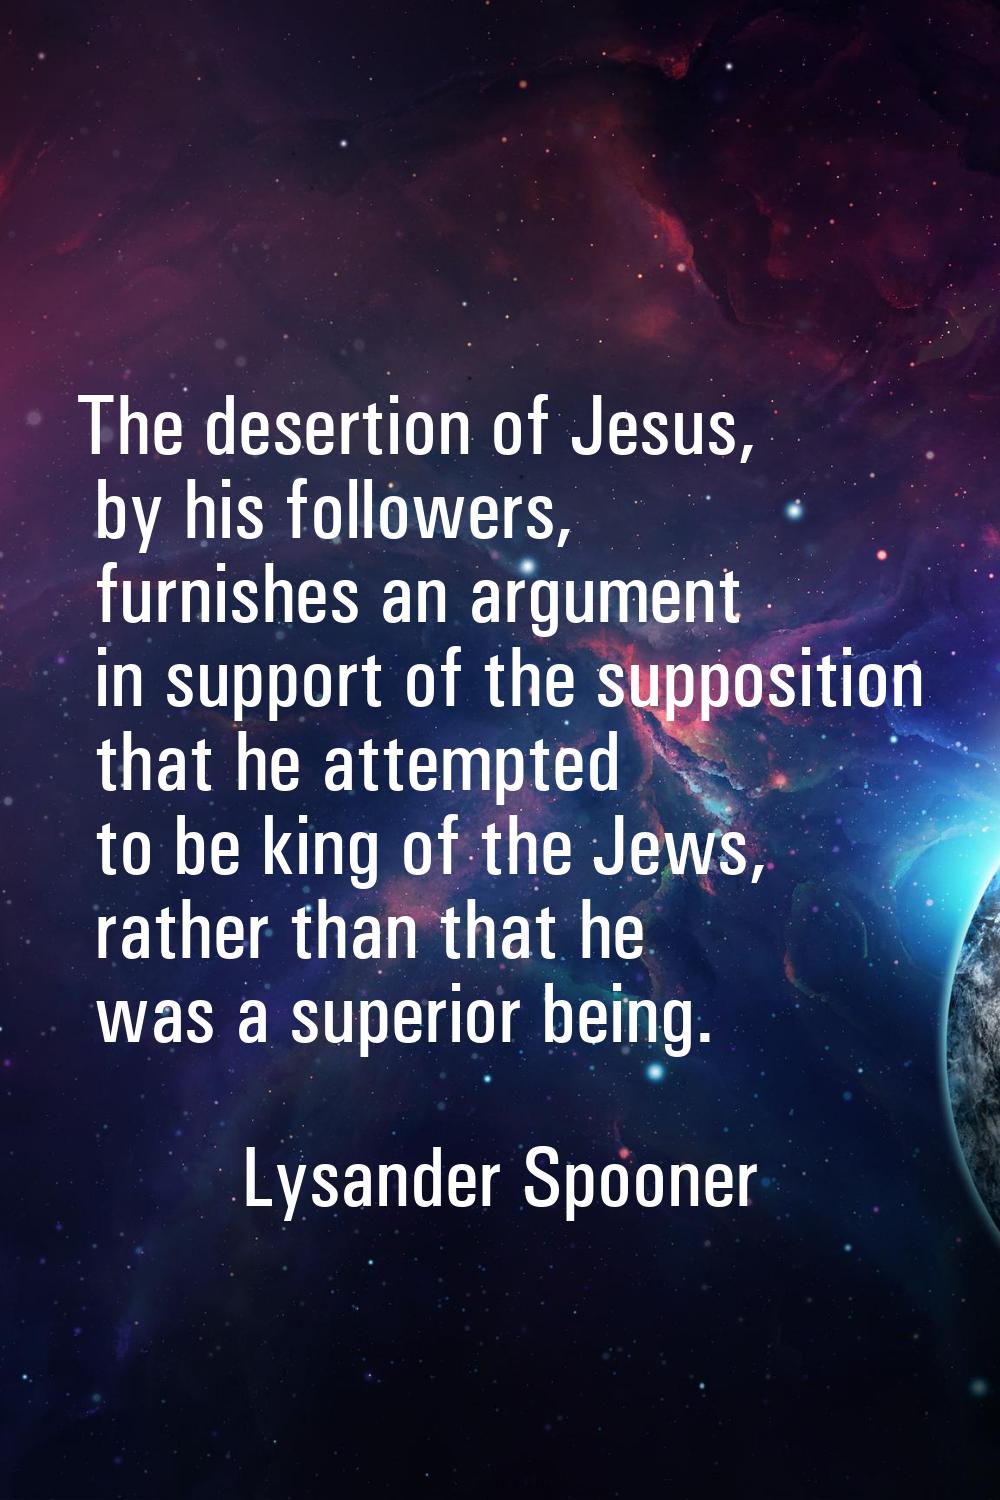 The desertion of Jesus, by his followers, furnishes an argument in support of the supposition that 